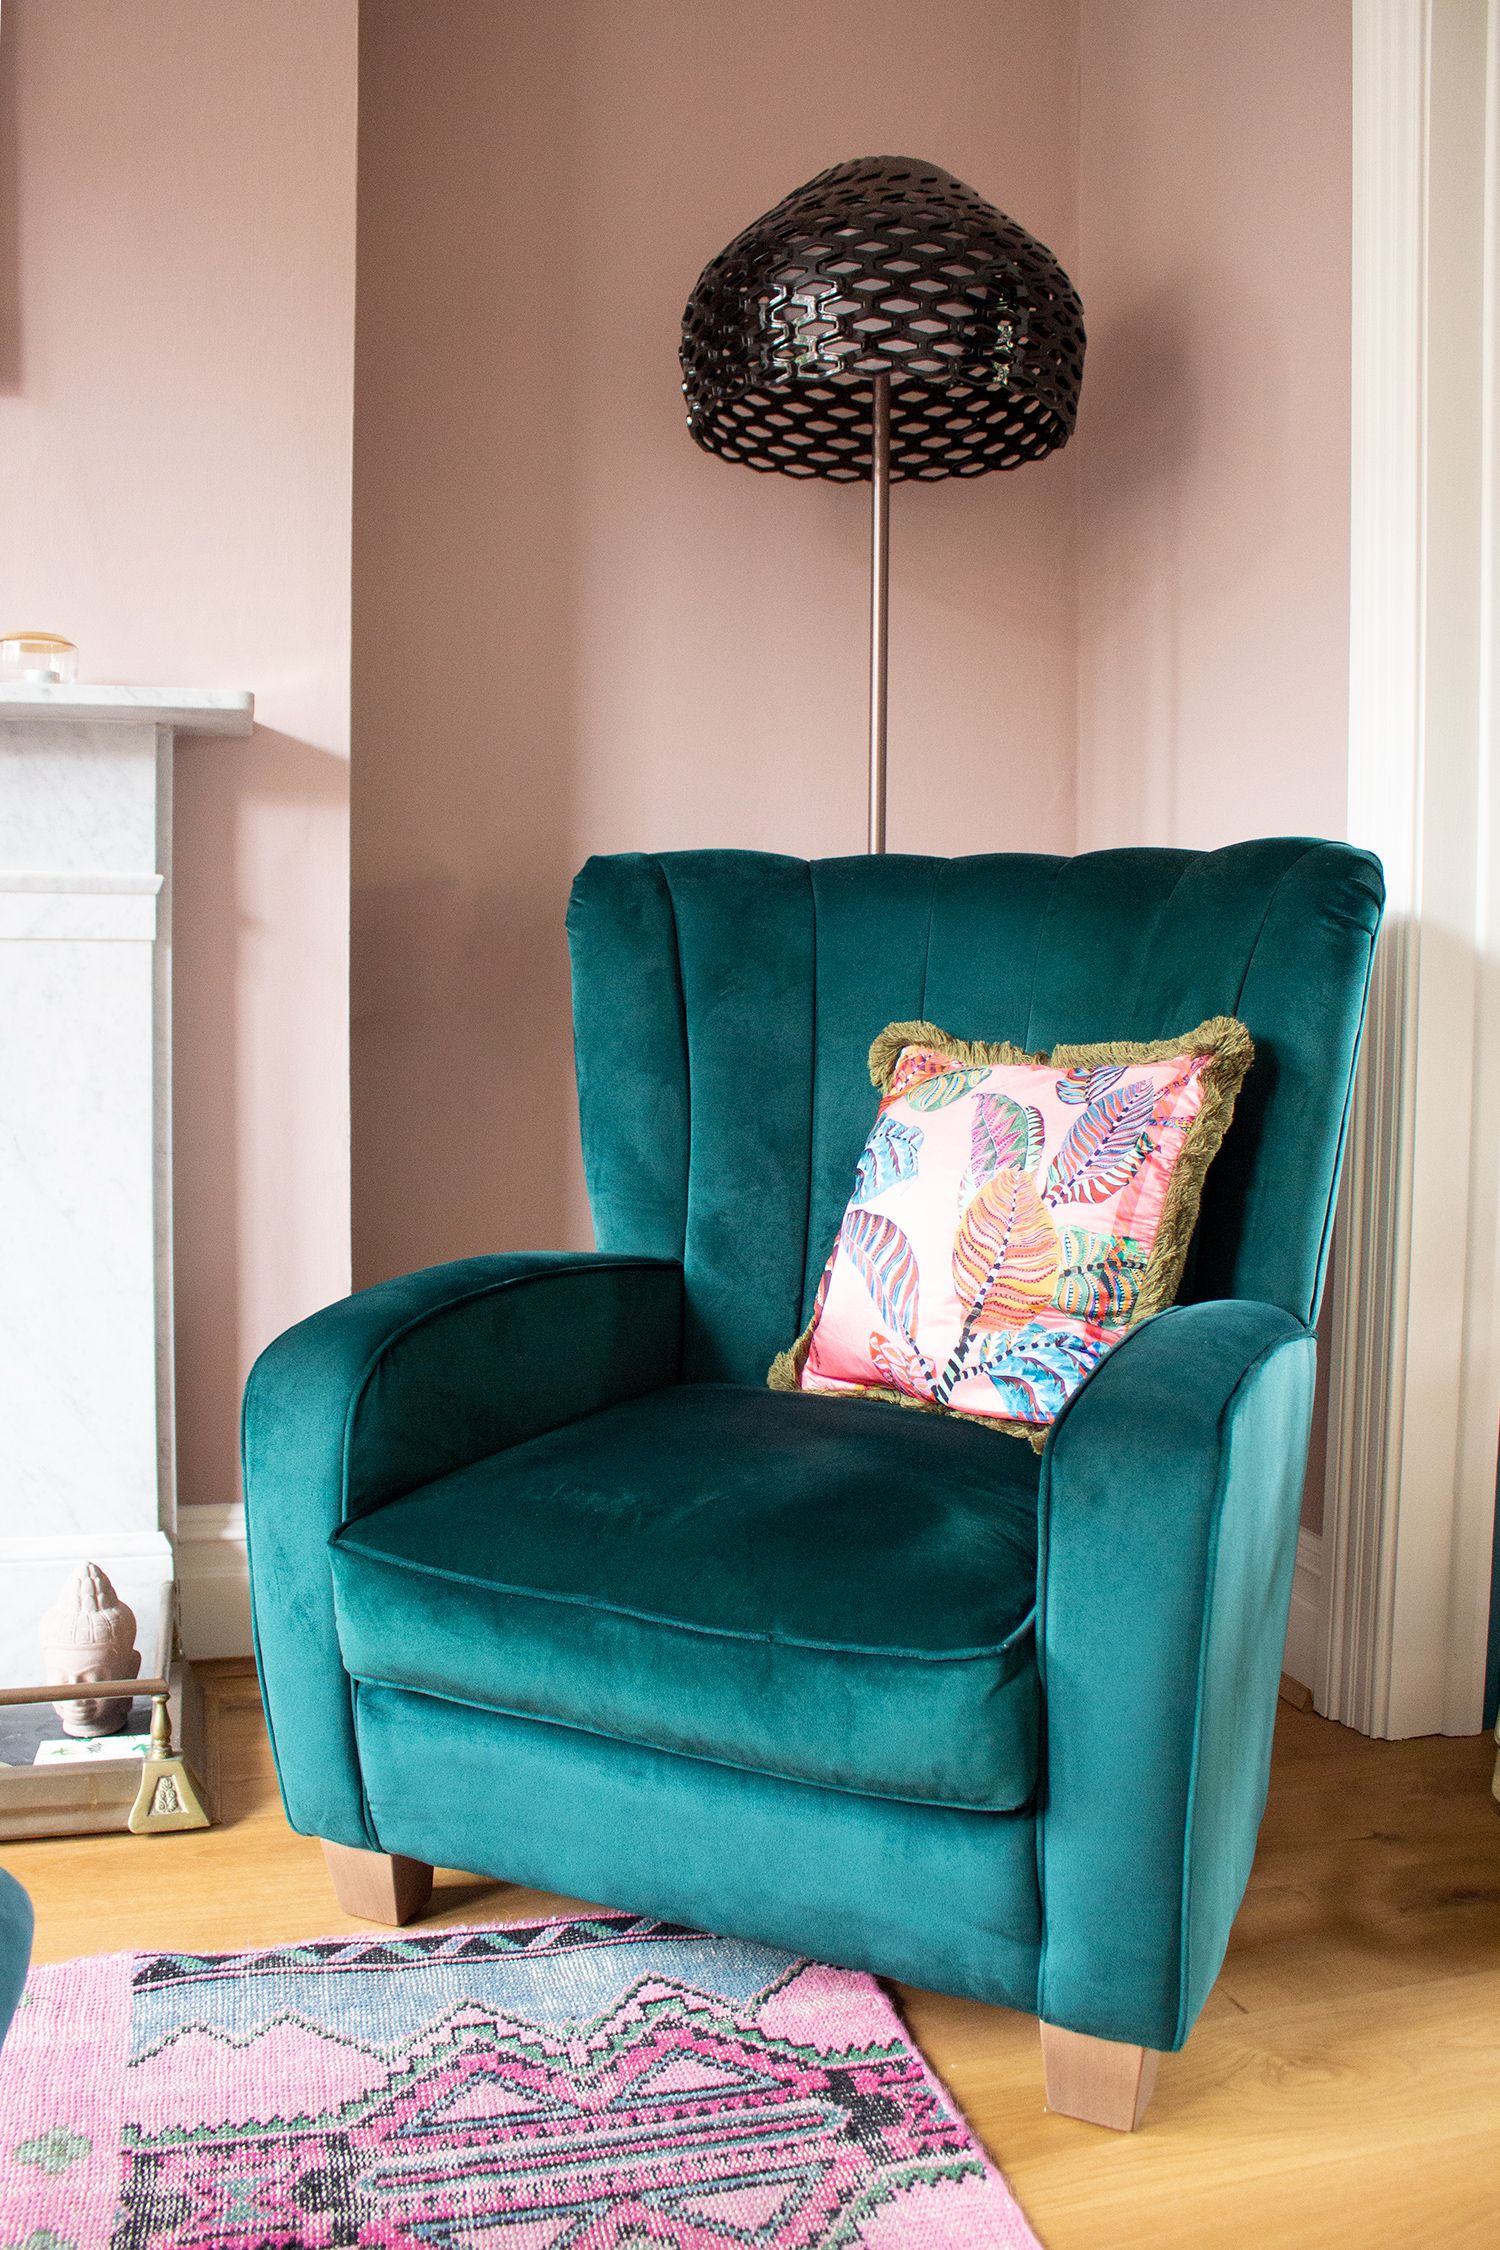 A teal velvet chair with a black standard lamp behind it.